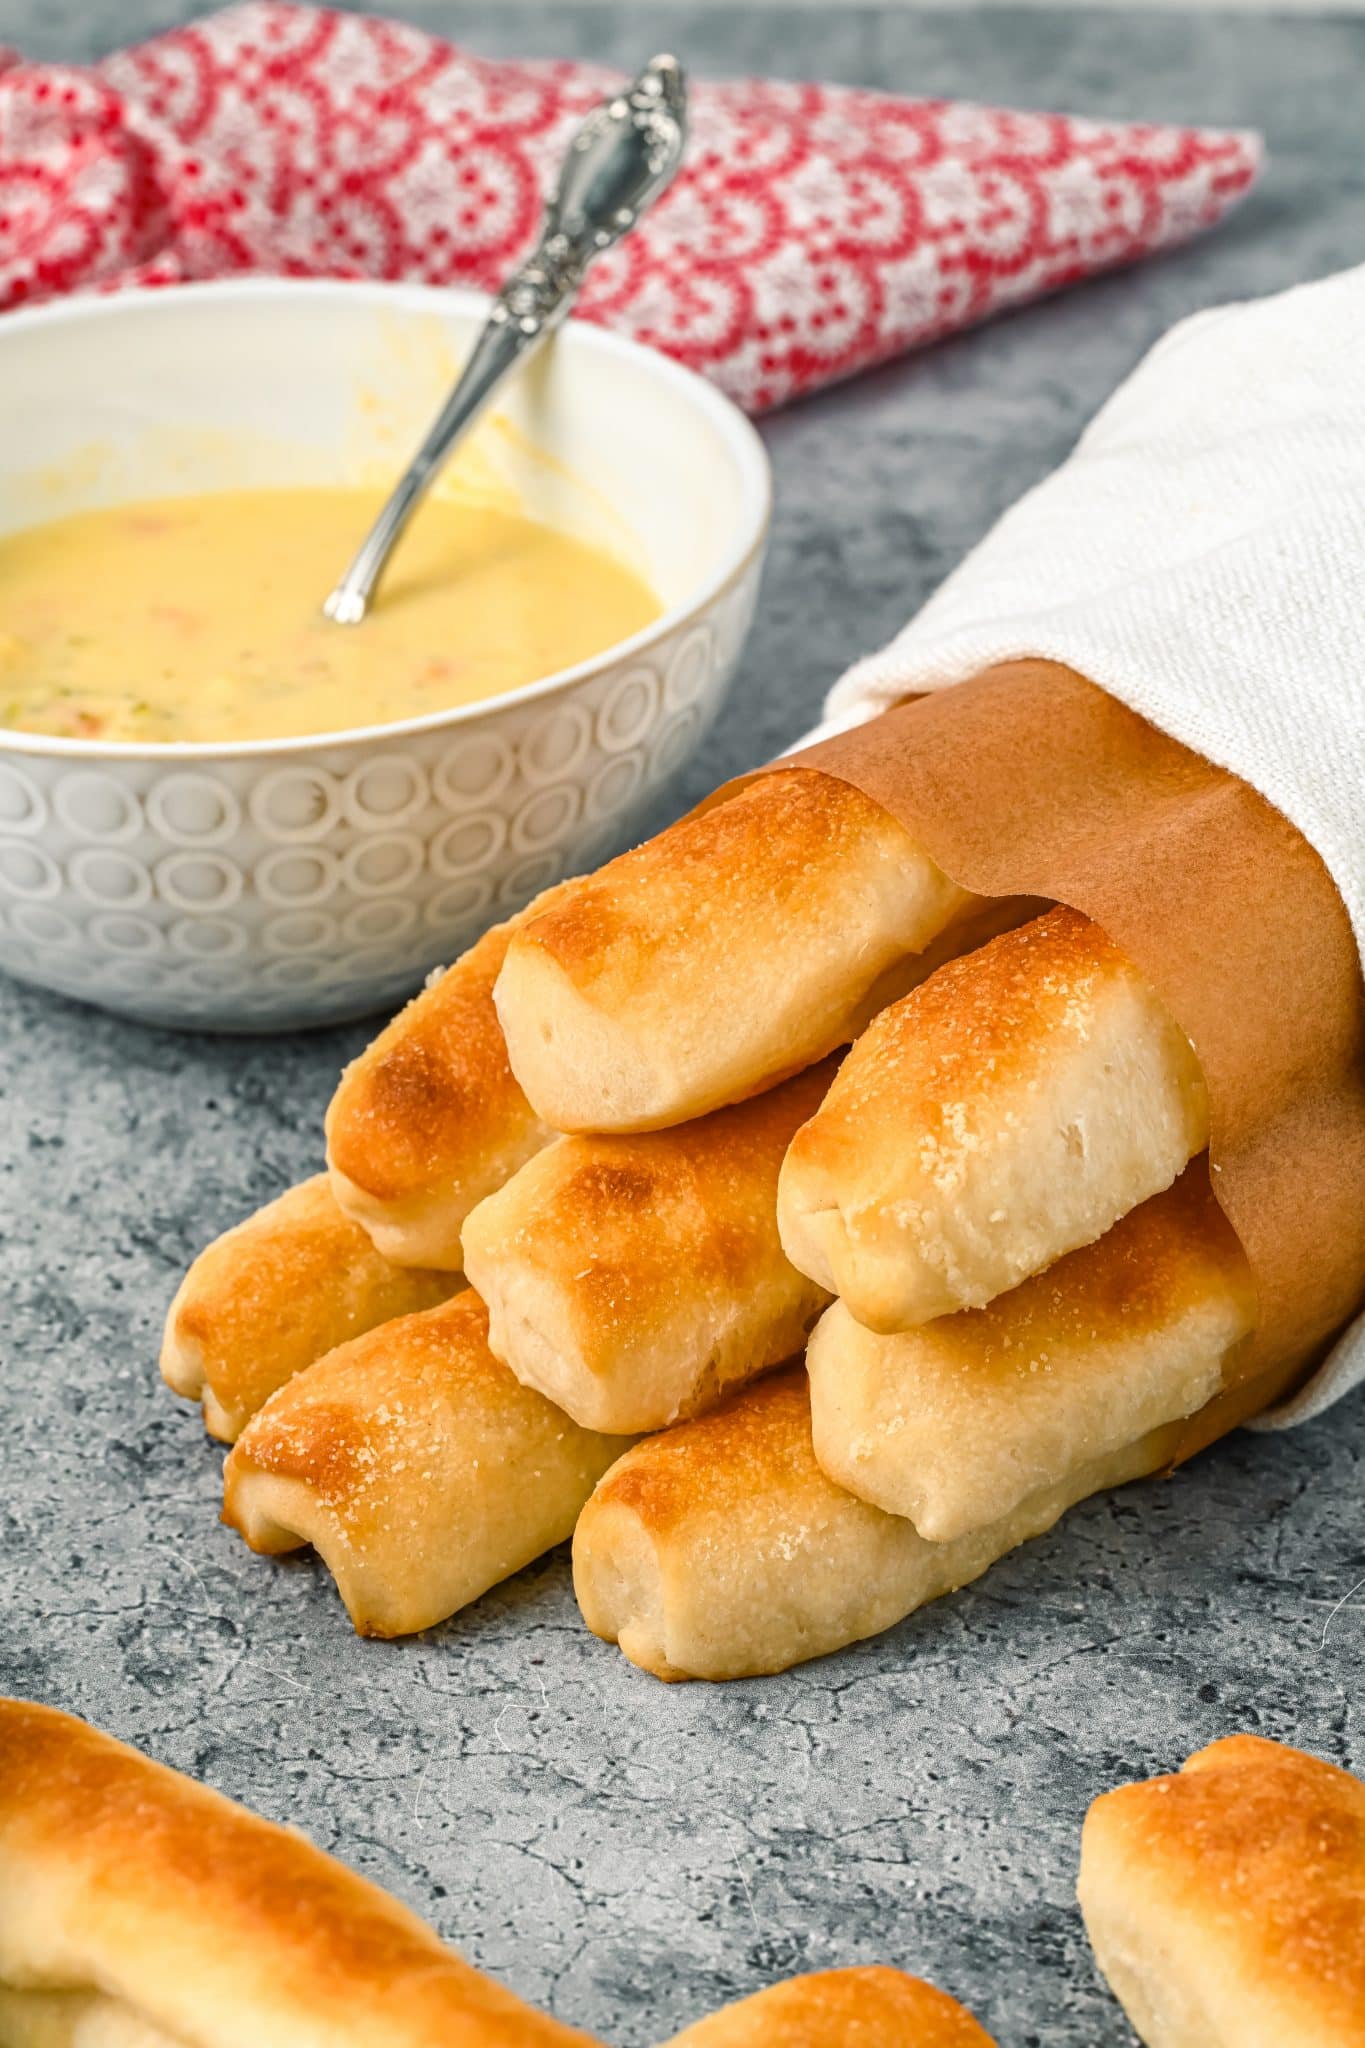 Copycat Olive Garden Breadsticks which are Italian Breadsticks, wrapped in paper, wrapped in a napkin, on a blue/gray background, next to a white bowl of soup.